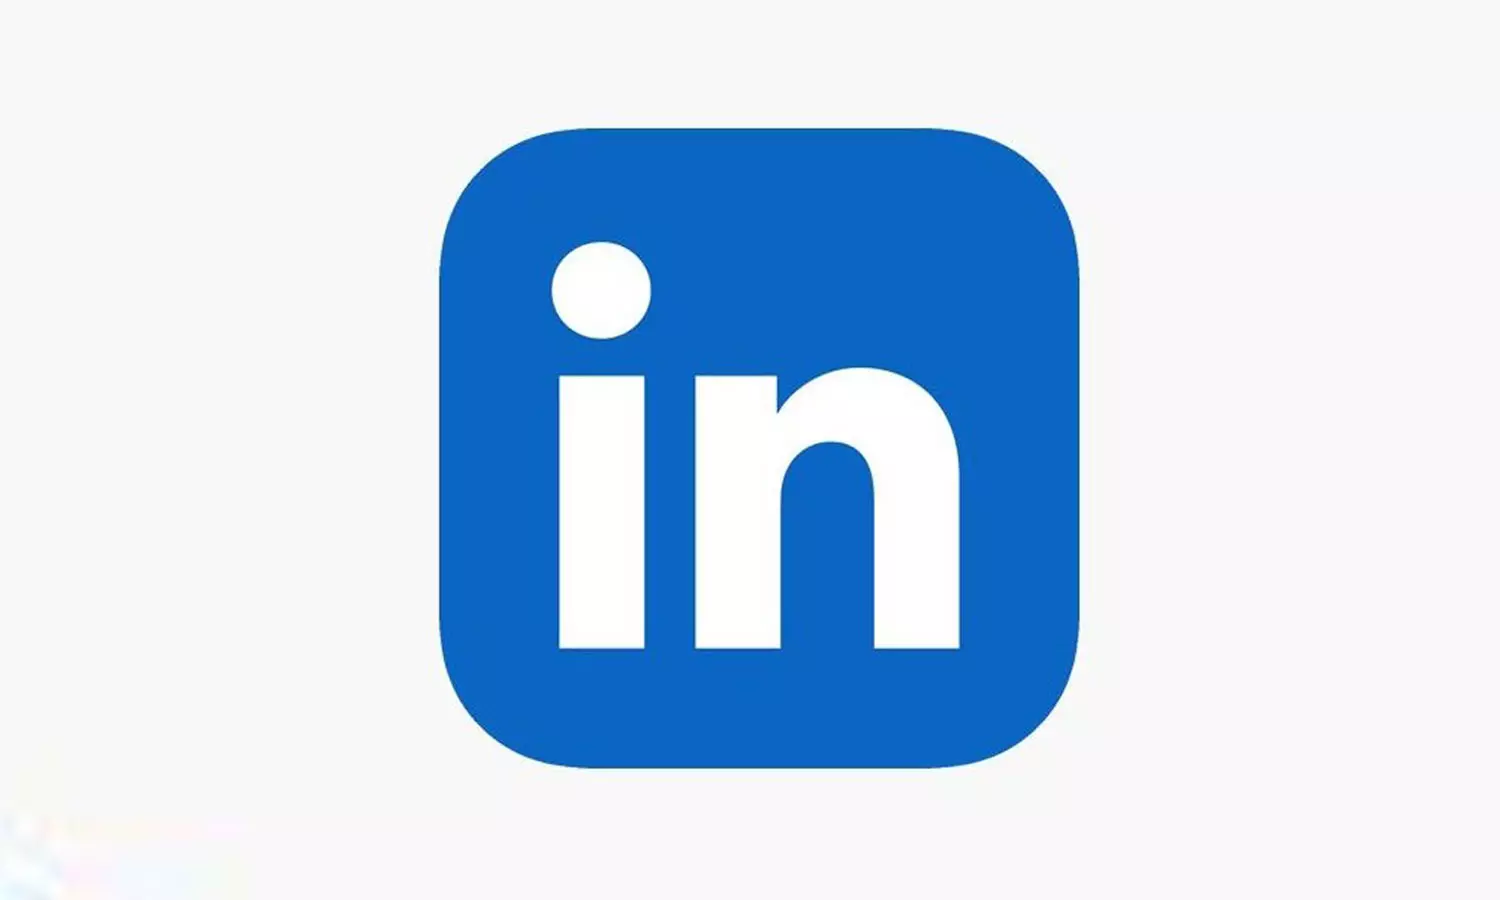 6 tips to build a strong network on LinkedIn